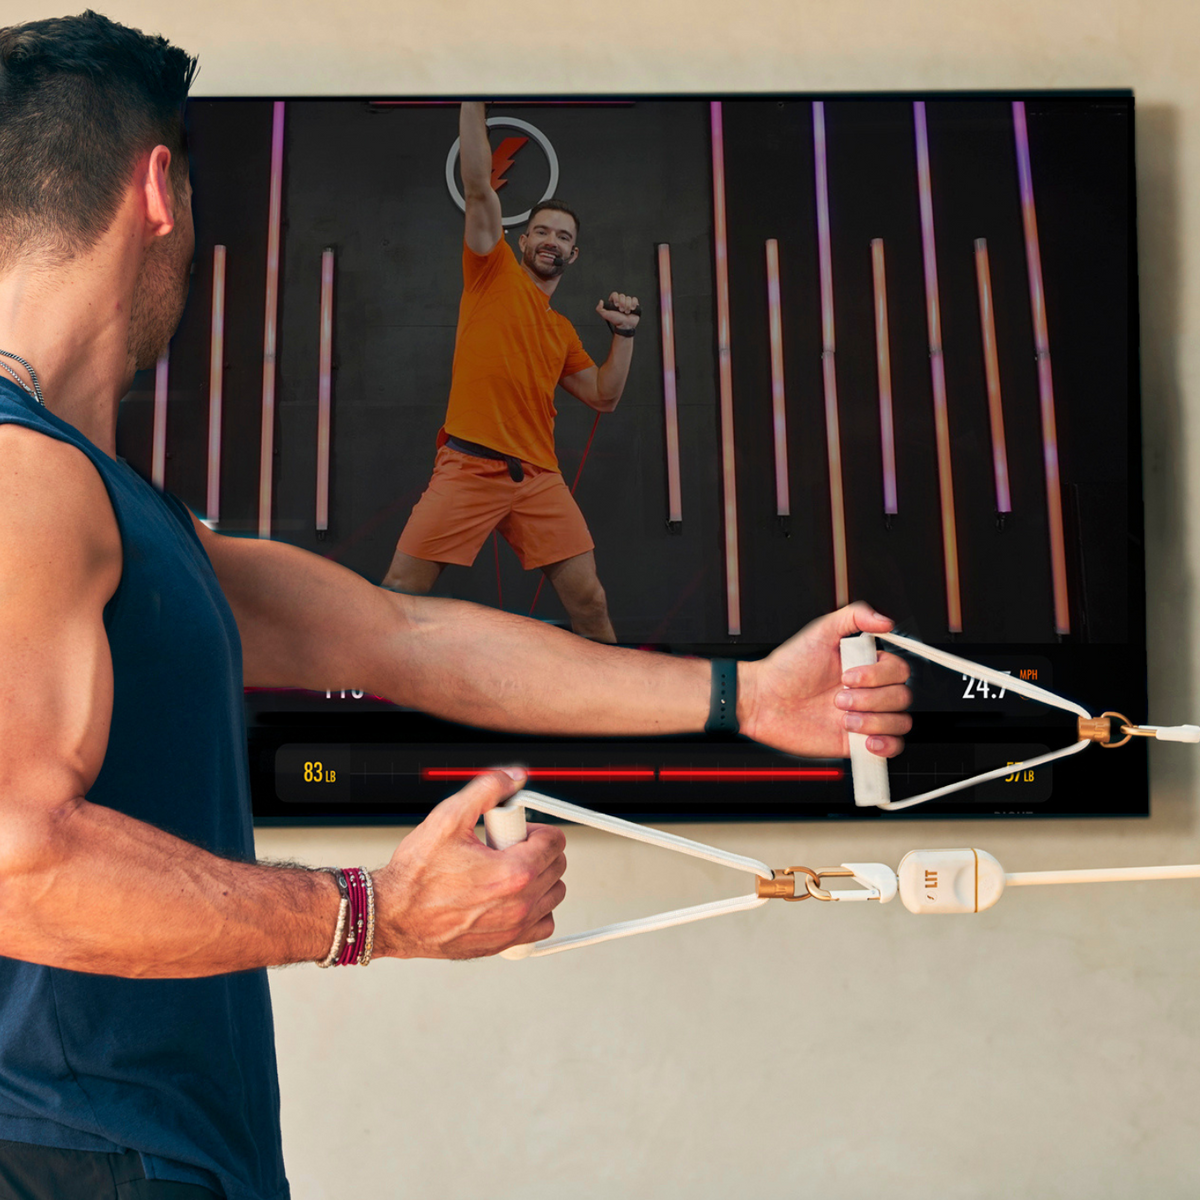 5 Benefits of Resistance Bands to Maximize Your At-Home Workout